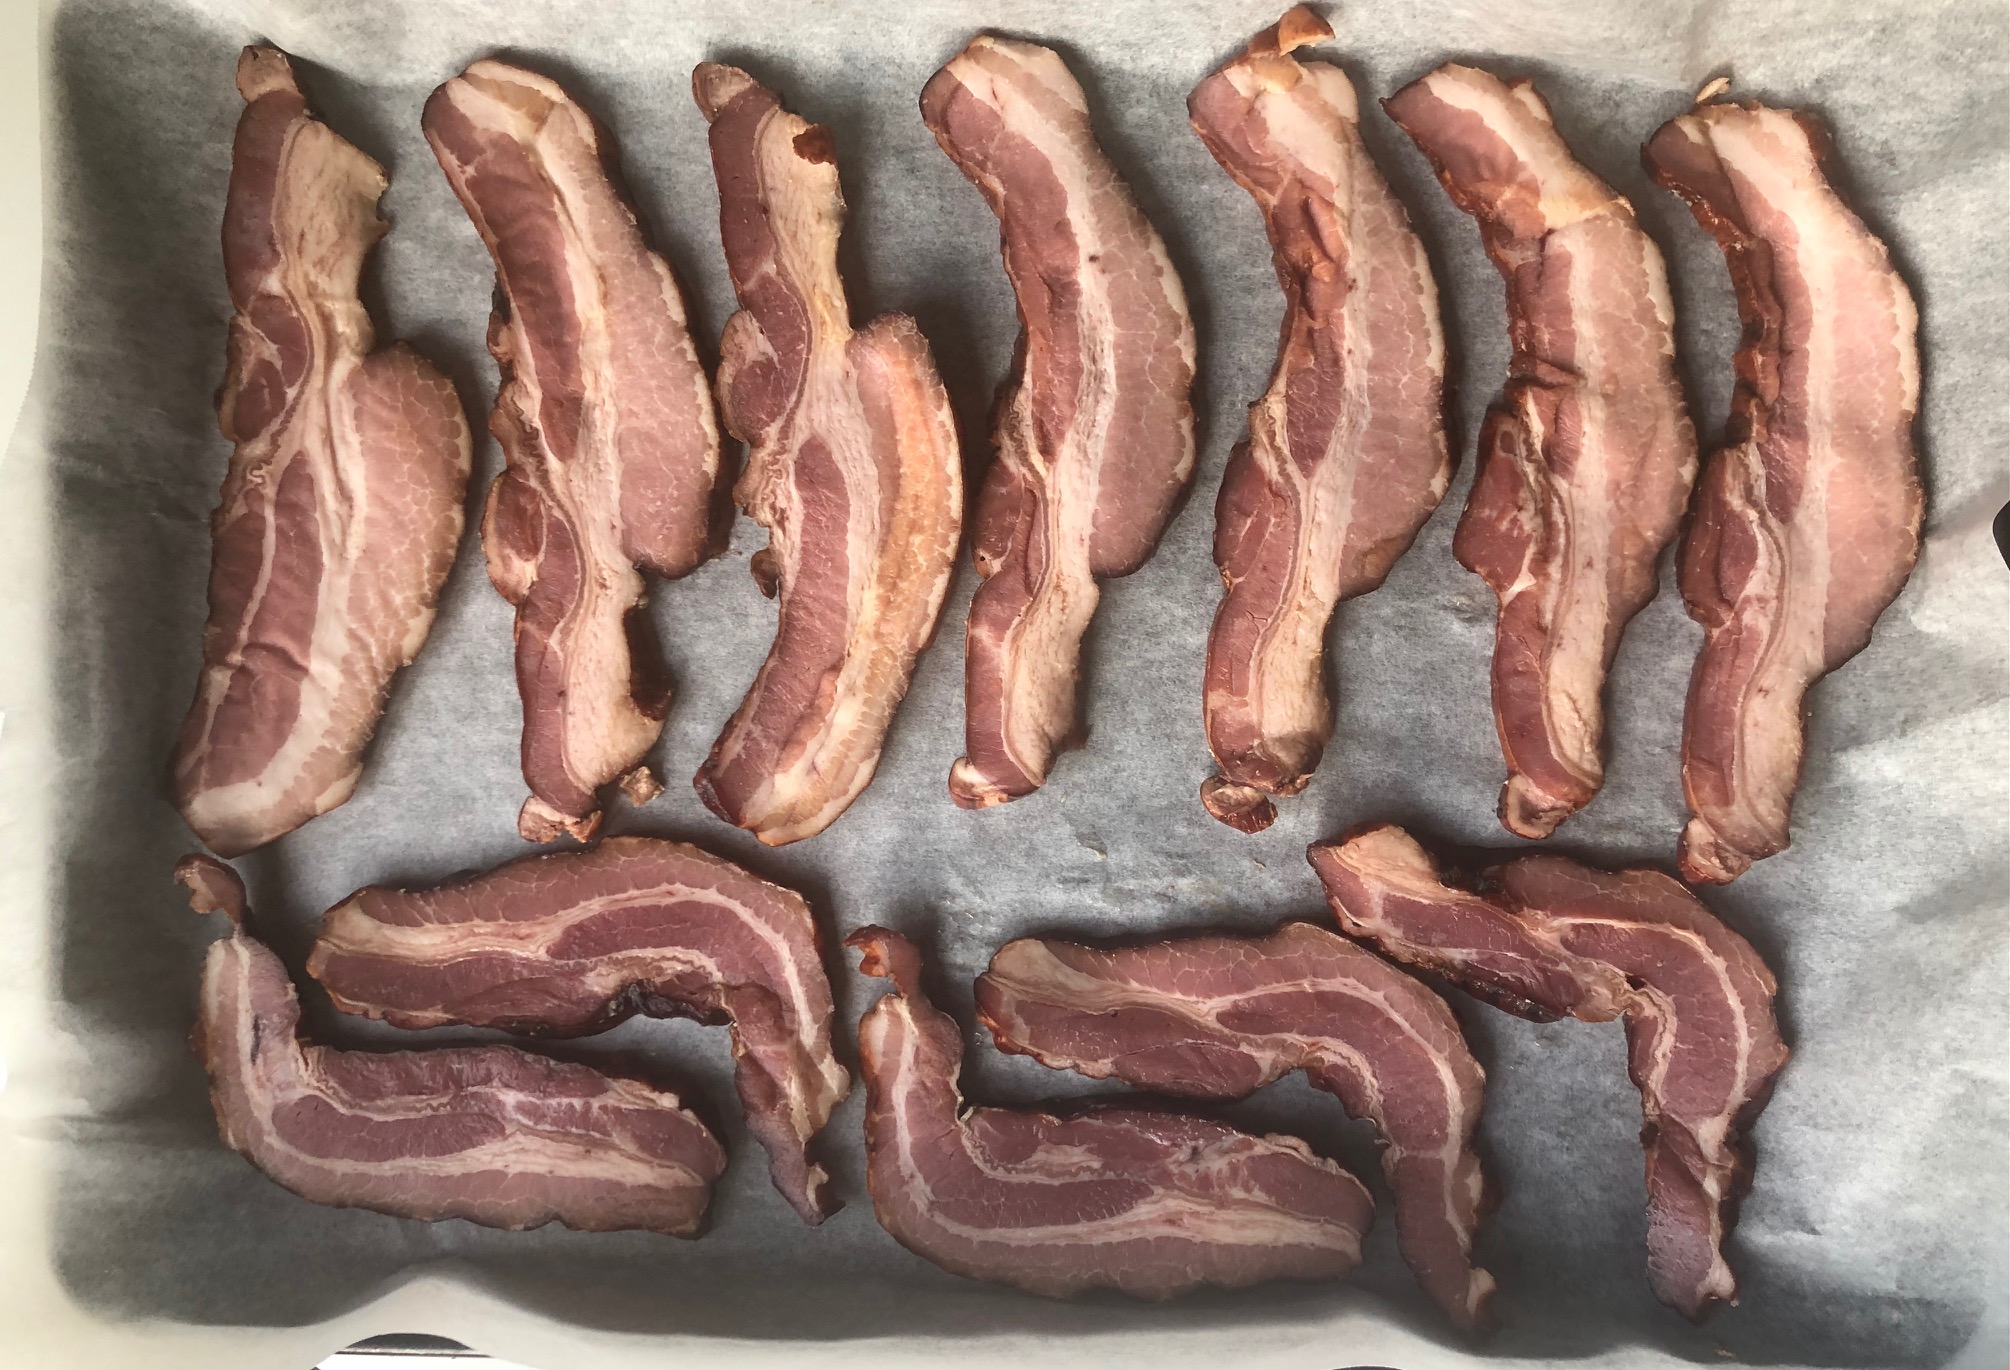 On a tray lined with parchment paper, there are thick slices of uncooked bacon. Photo by Alyssa Buckley.